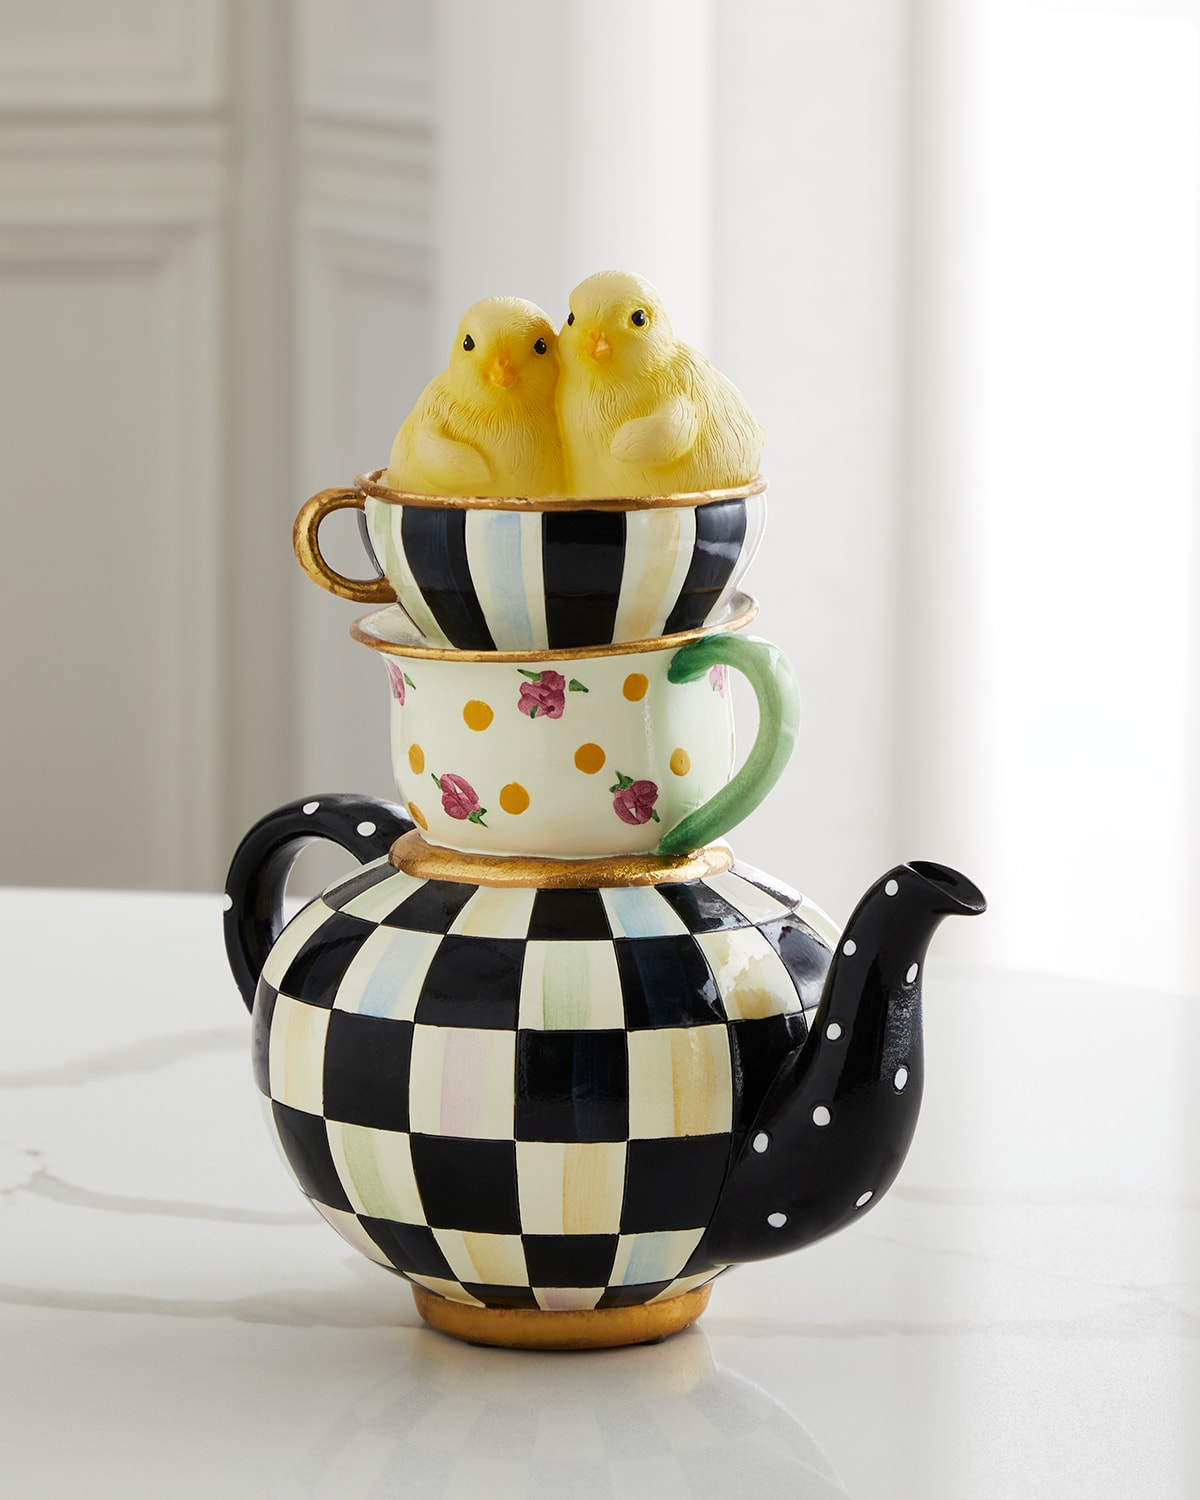 MACKENZIE-CHILDS COURTLY CHICKATEE TEAPOT